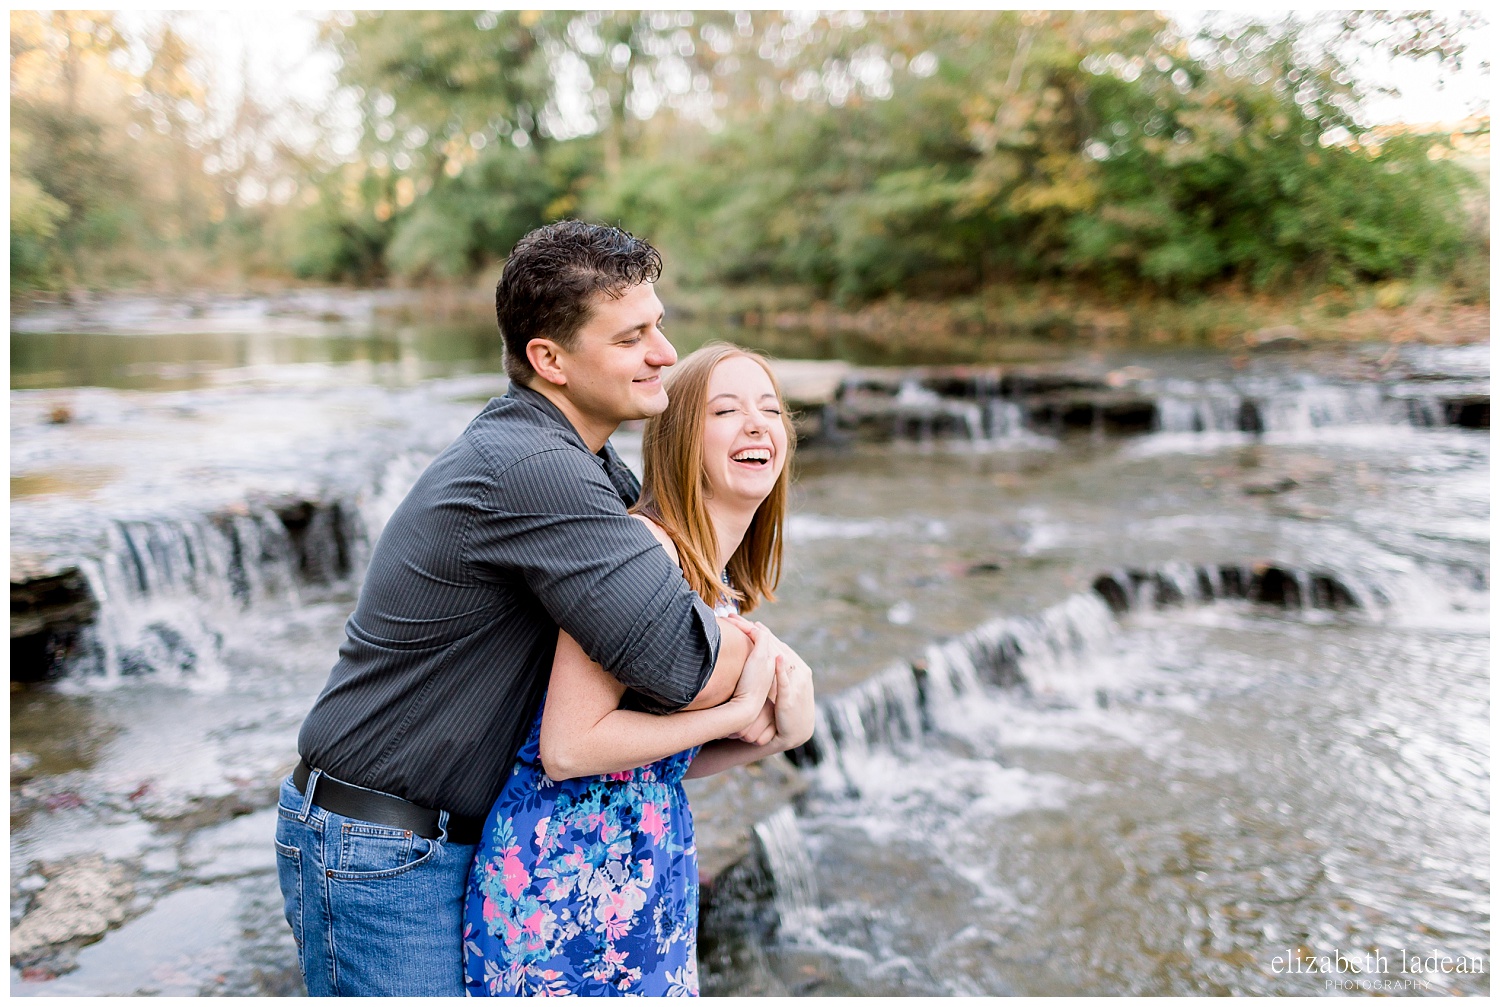 Northland-KC-Fall-Engagement-Photos-with-dog-A+B-2018-elizabeth-ladean-photography-photo_1490.jpg